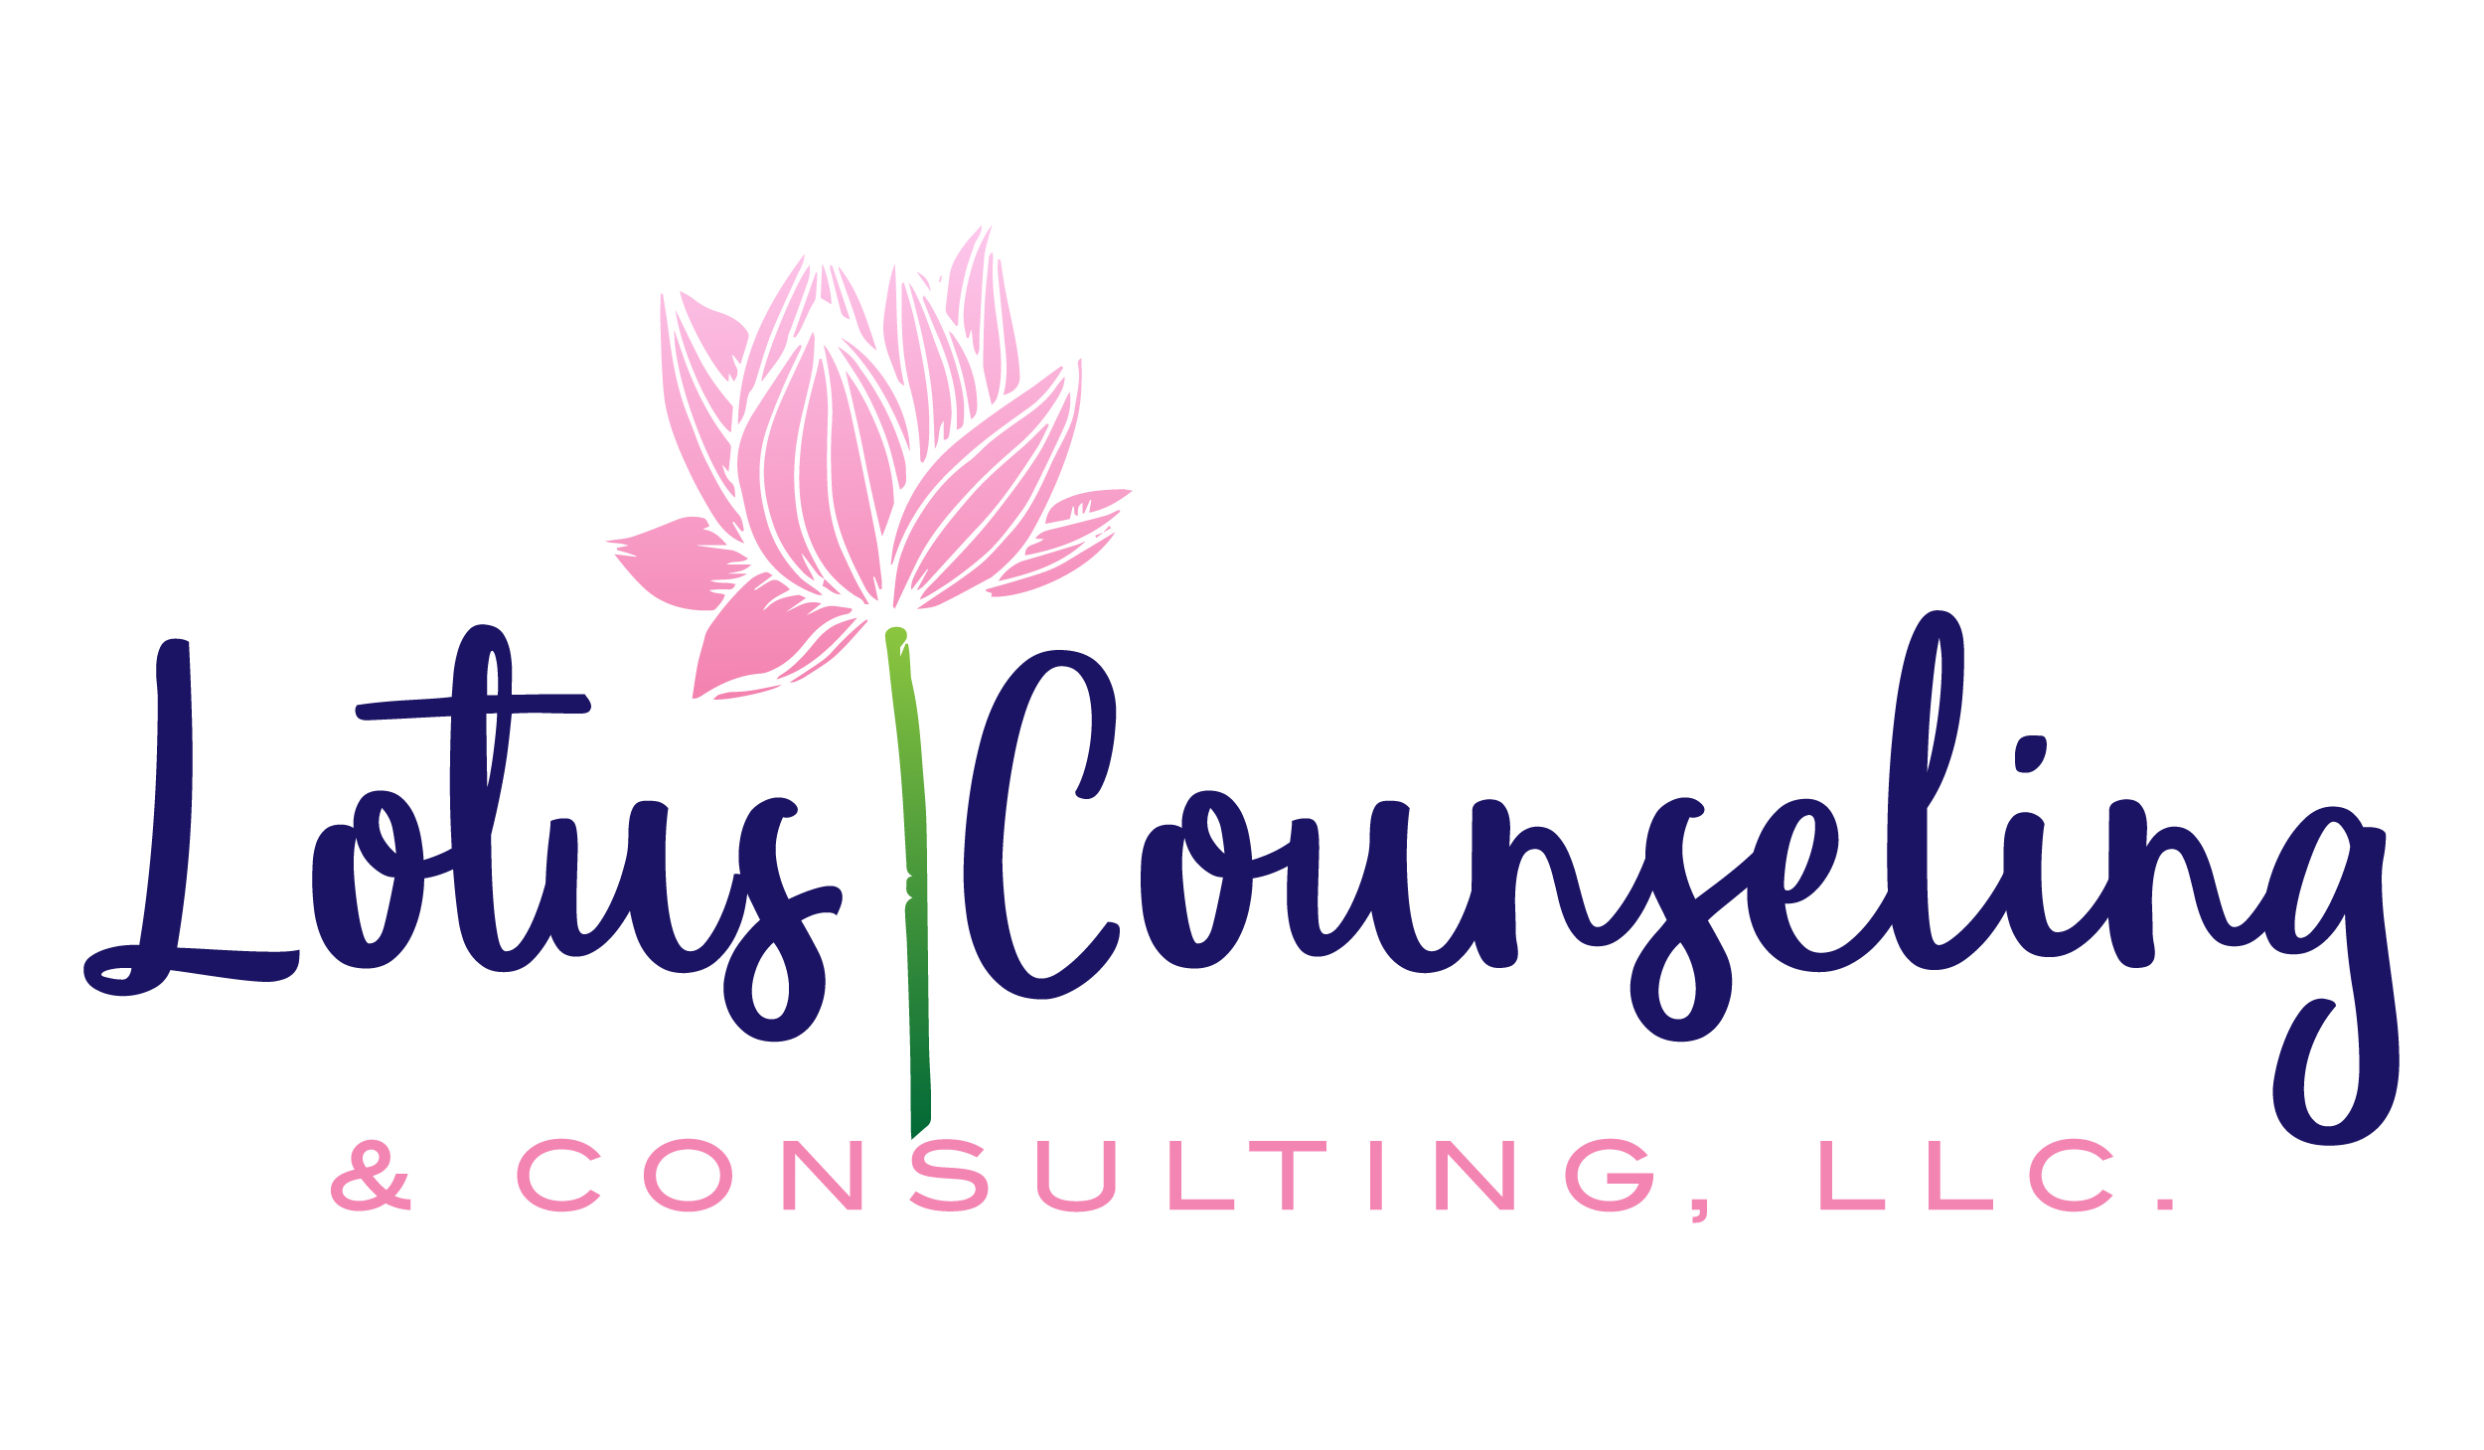 Complex Trauma Counselor helping clients with healing through the pain of today to better tomorrow